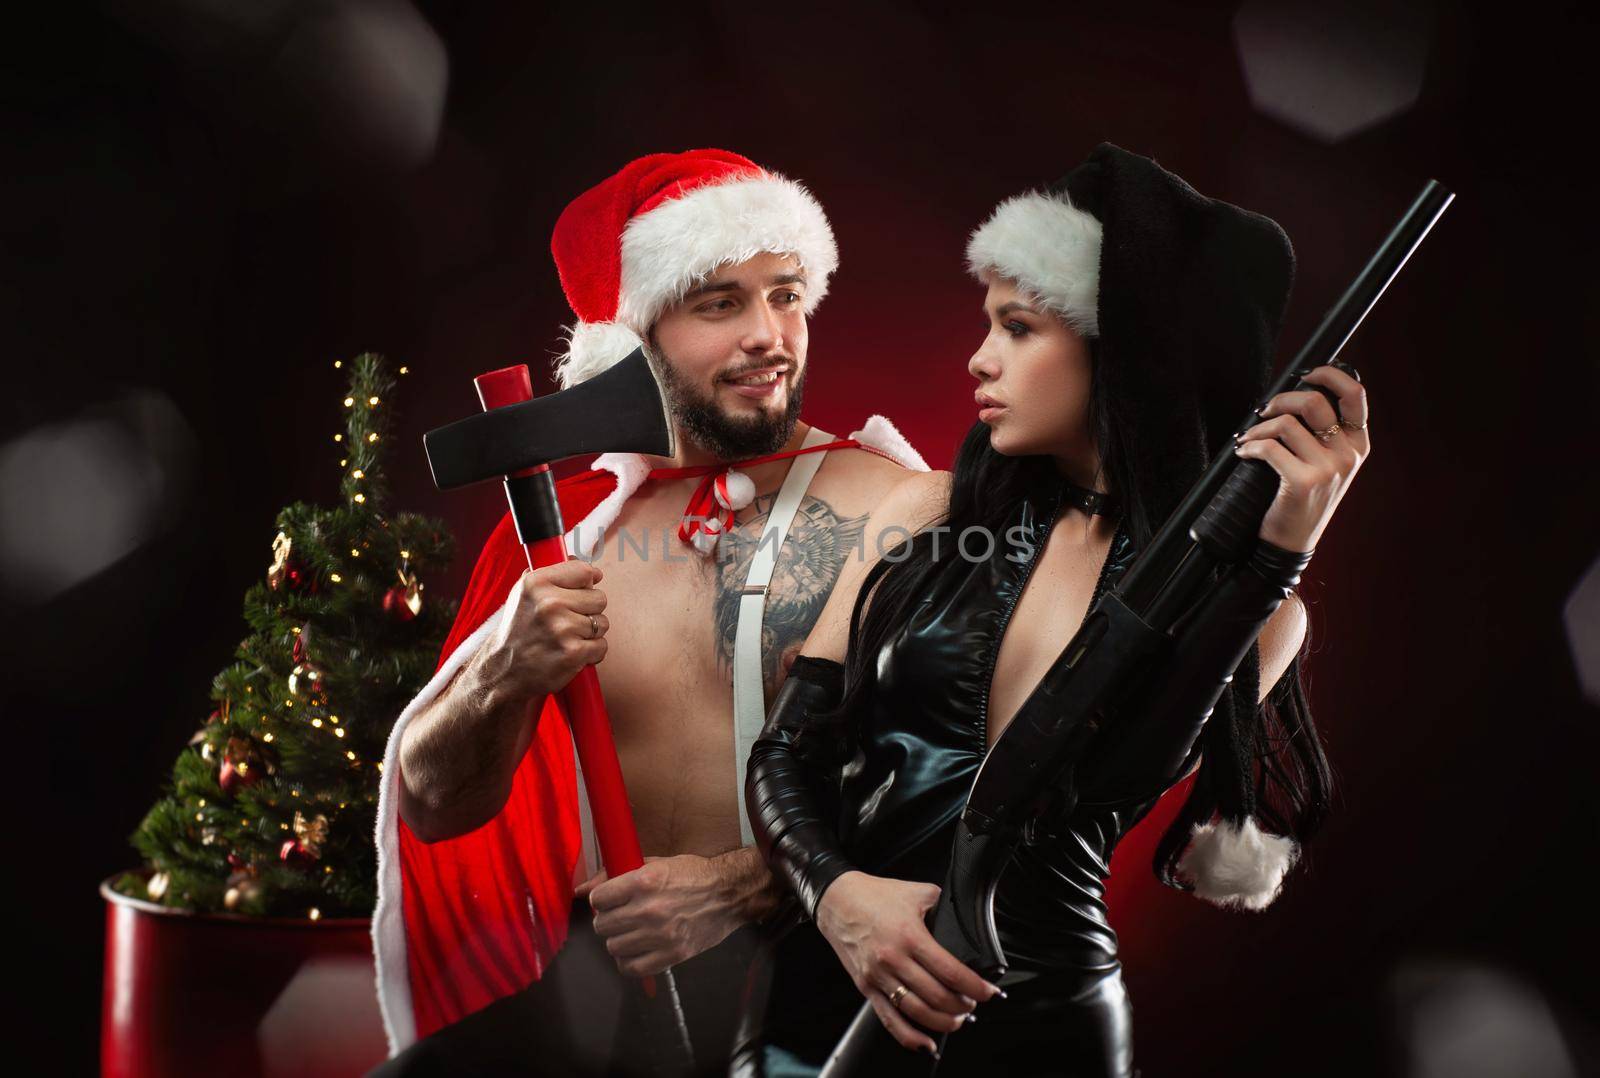 Christmas romantic photo shoot of a guy and a girl in New Year's Santa Claus costumes with weapons, a Christmas tree on a dark red background